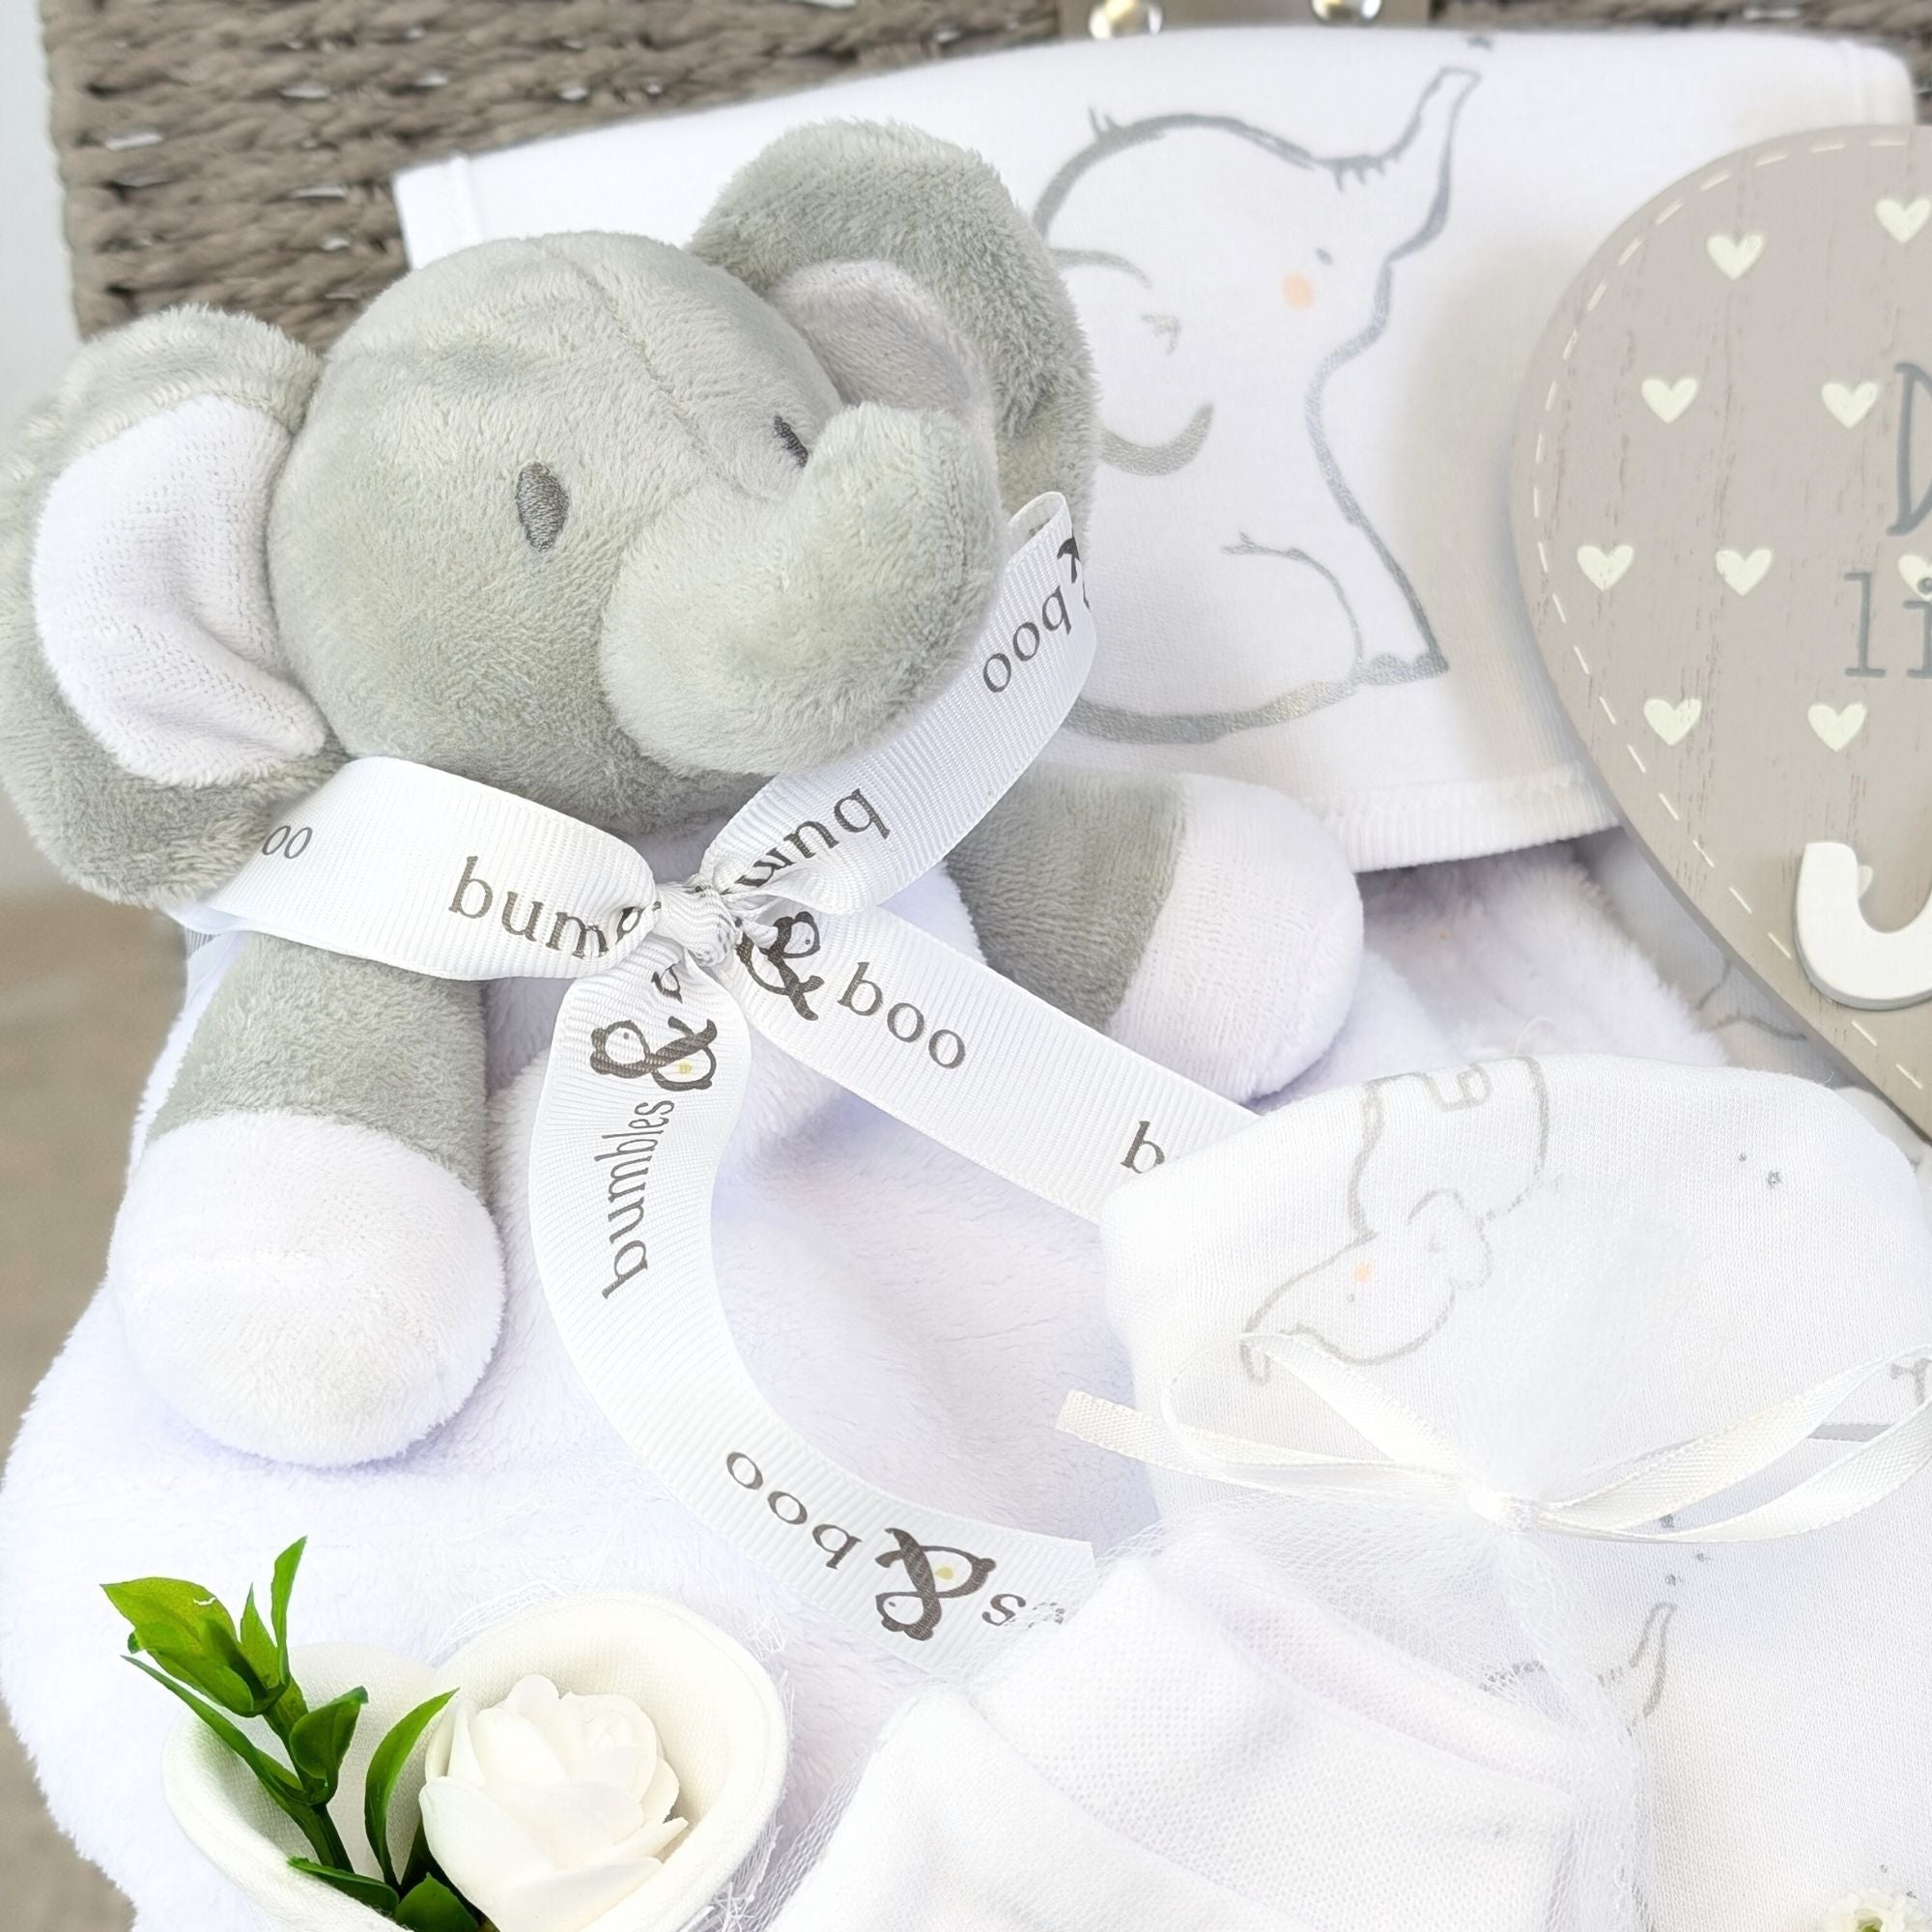 new baby gifts basket with white clothing set, elephant soft toy, baby plaque and baby mittens.